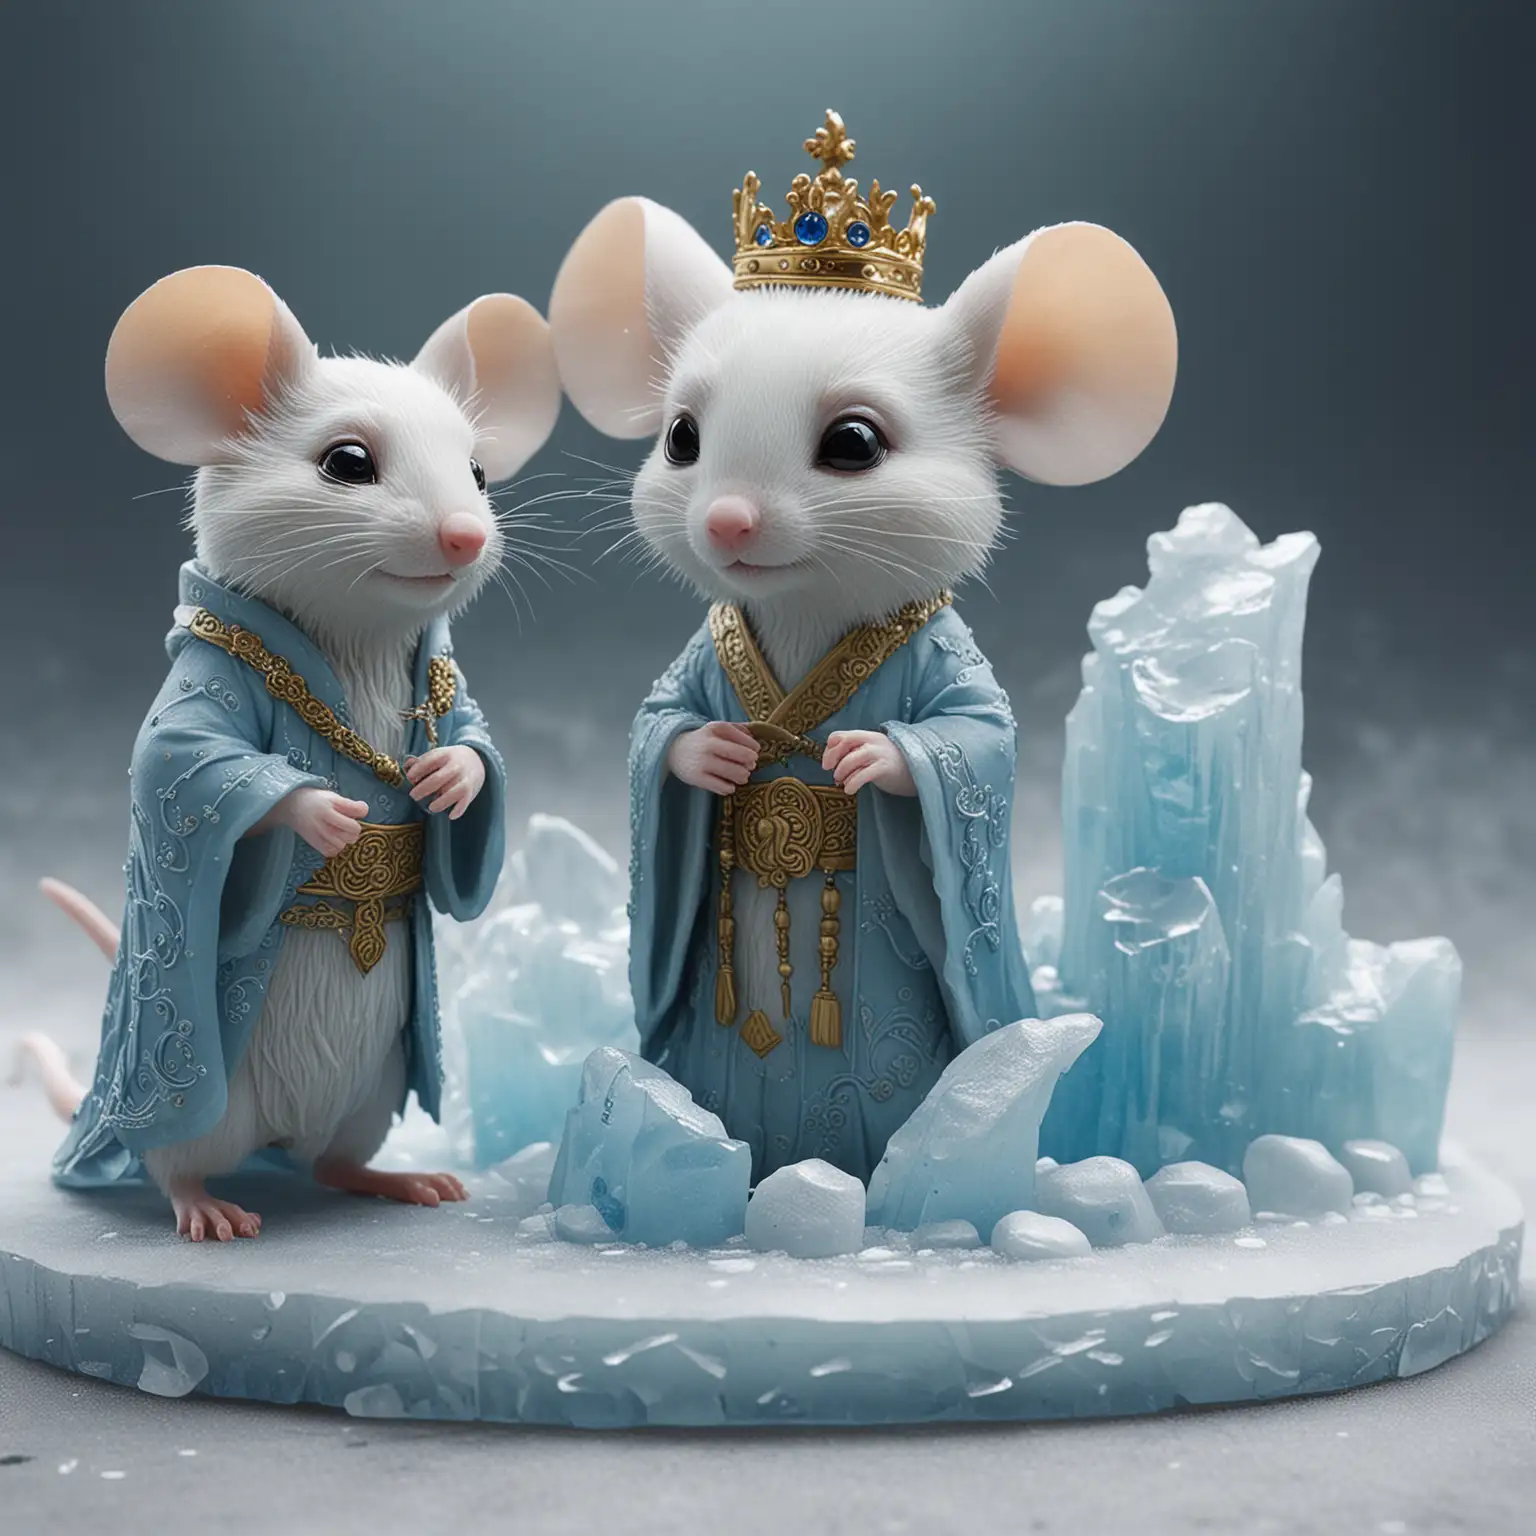 Adorable-Mouse-and-Ice-Emperor-King-Sculpture